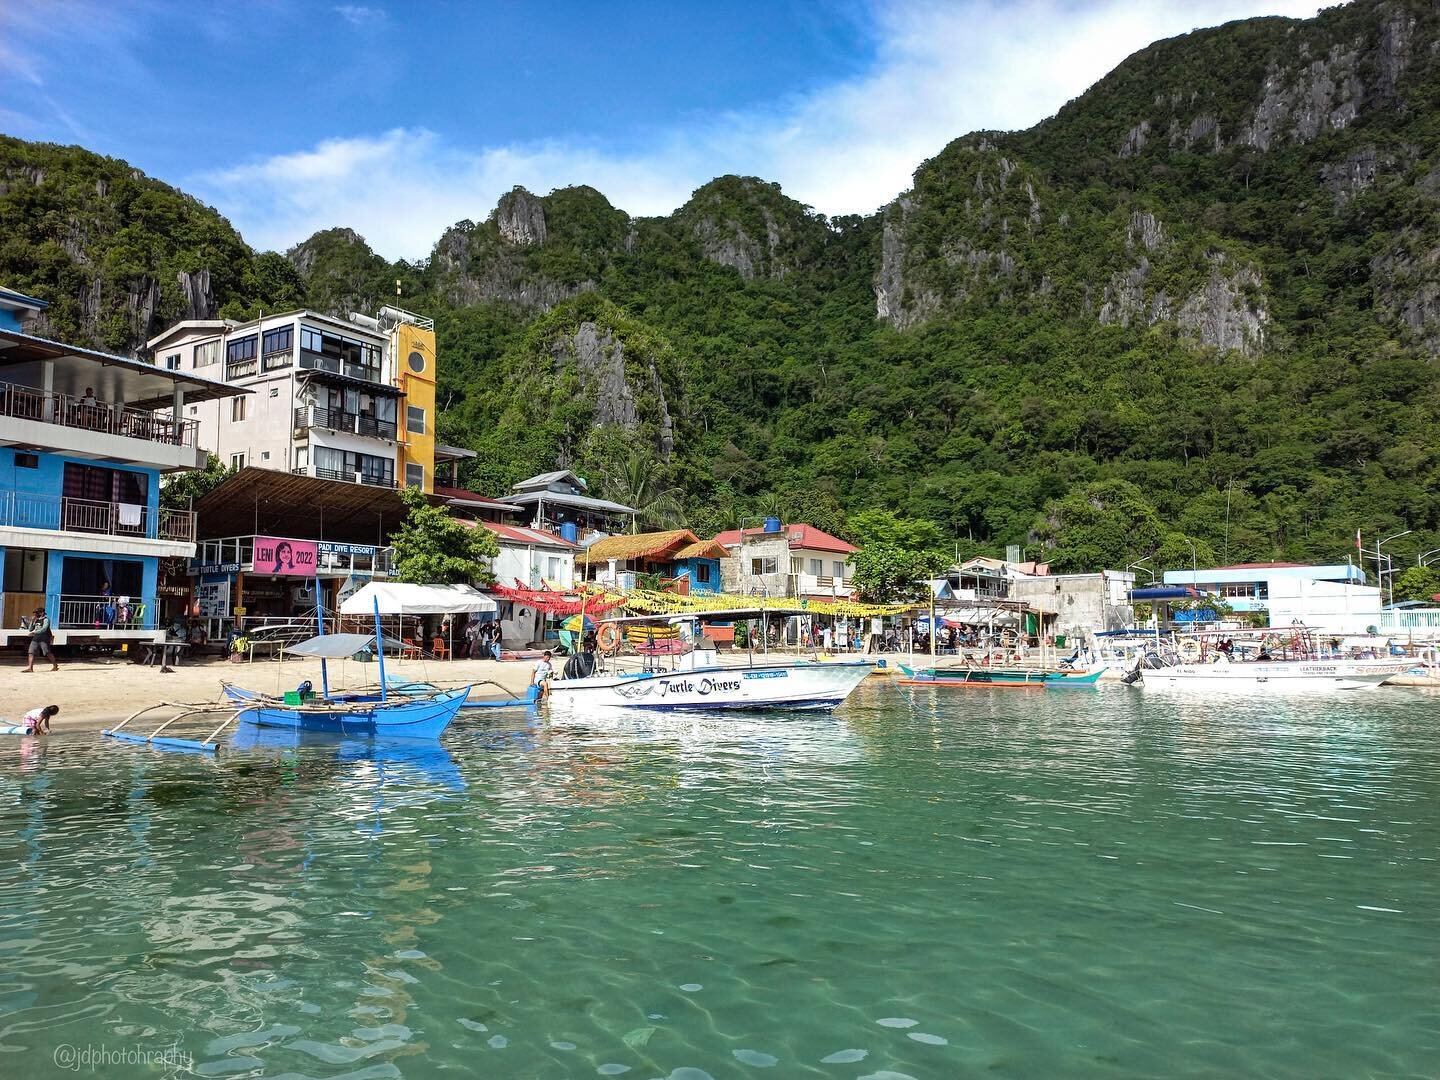 𝙀𝙡 𝙉𝙞𝙙𝙤'𝙨 Harbour area with the beautiful 𝙗𝙖𝙘𝙠𝙙𝙧𝙤𝙥. 

Turtle divers Speedboat ready for diving.

#elnido #town #shoreline #coast 
.
.

.
#Landscapelovers 
#Tourism  #wonderful_places #traveling  #elnidotown  #wanderlust  #beautifuldest